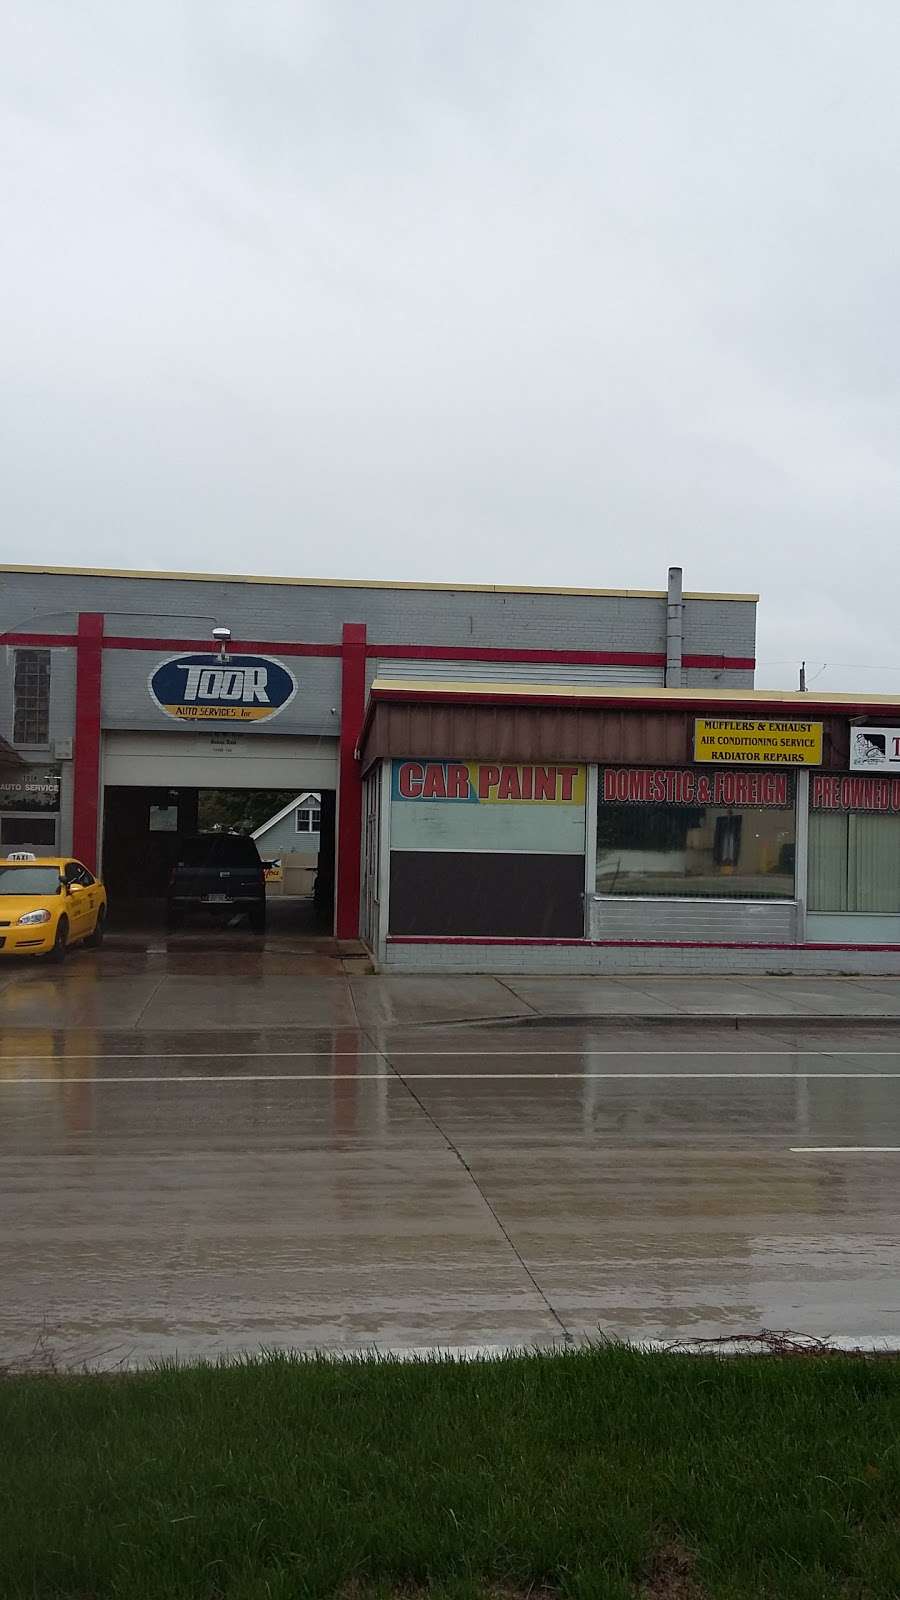 Toor Auto Services Inc | 4161 S Howell Ave # 3, Milwaukee, WI 53207 | Phone: (414) 282-6001